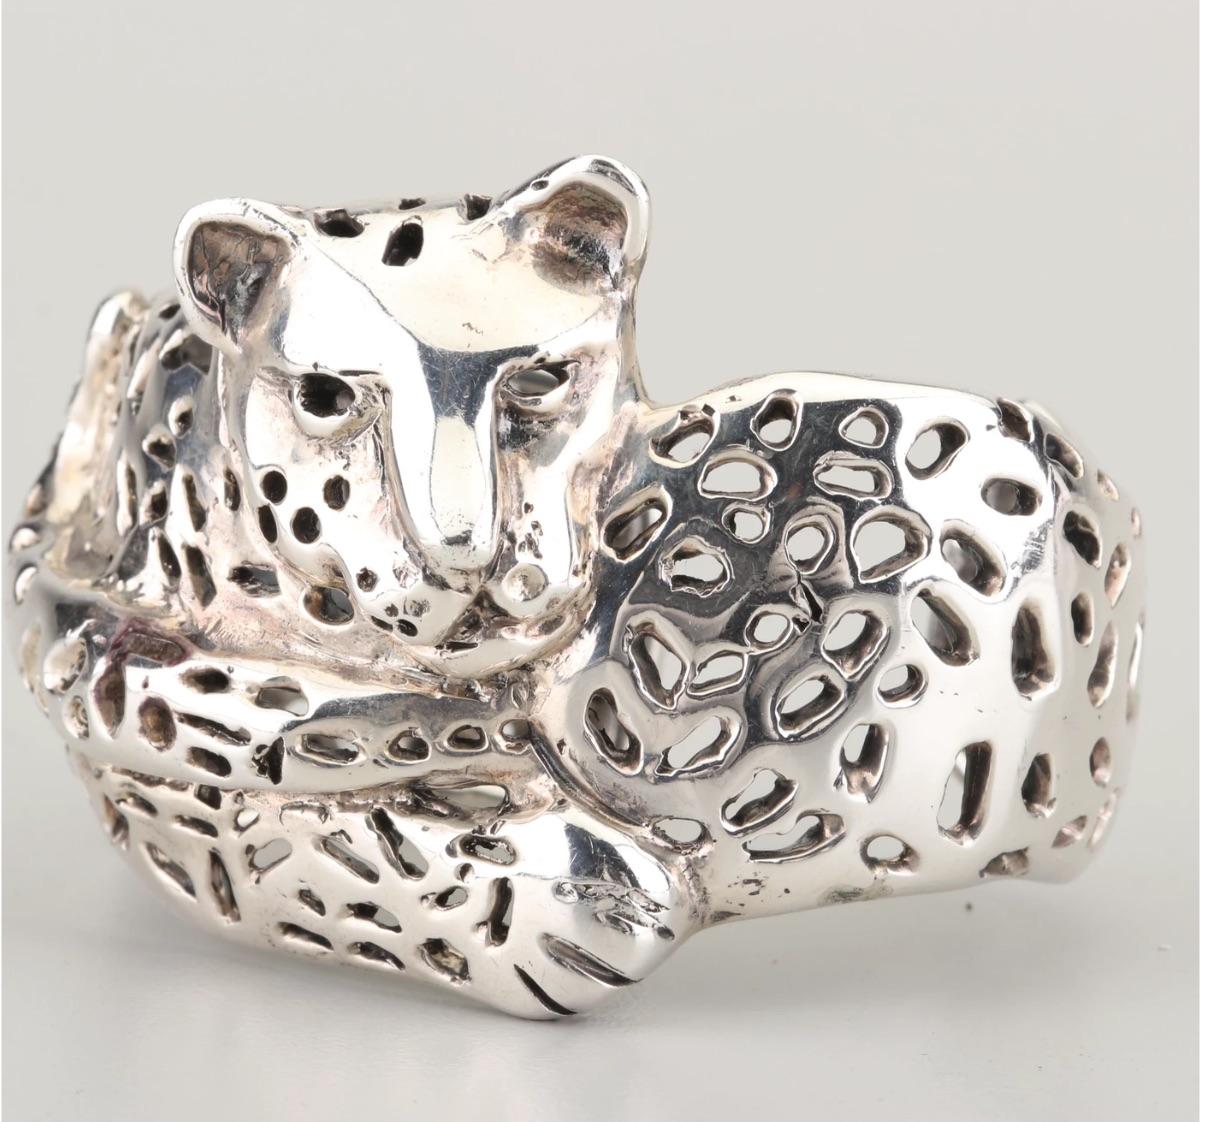 A Rare Superb wild Modernist Brutalist Exotic Mexico Sterling Silver Jaguar Cuff Bracelet by noted silver artisan Emilia Castillo of Taxco Mexico, fully Hallmarked,  from the family of the most elevated artisans of Mexico jewelry-Los Castillos. 
The